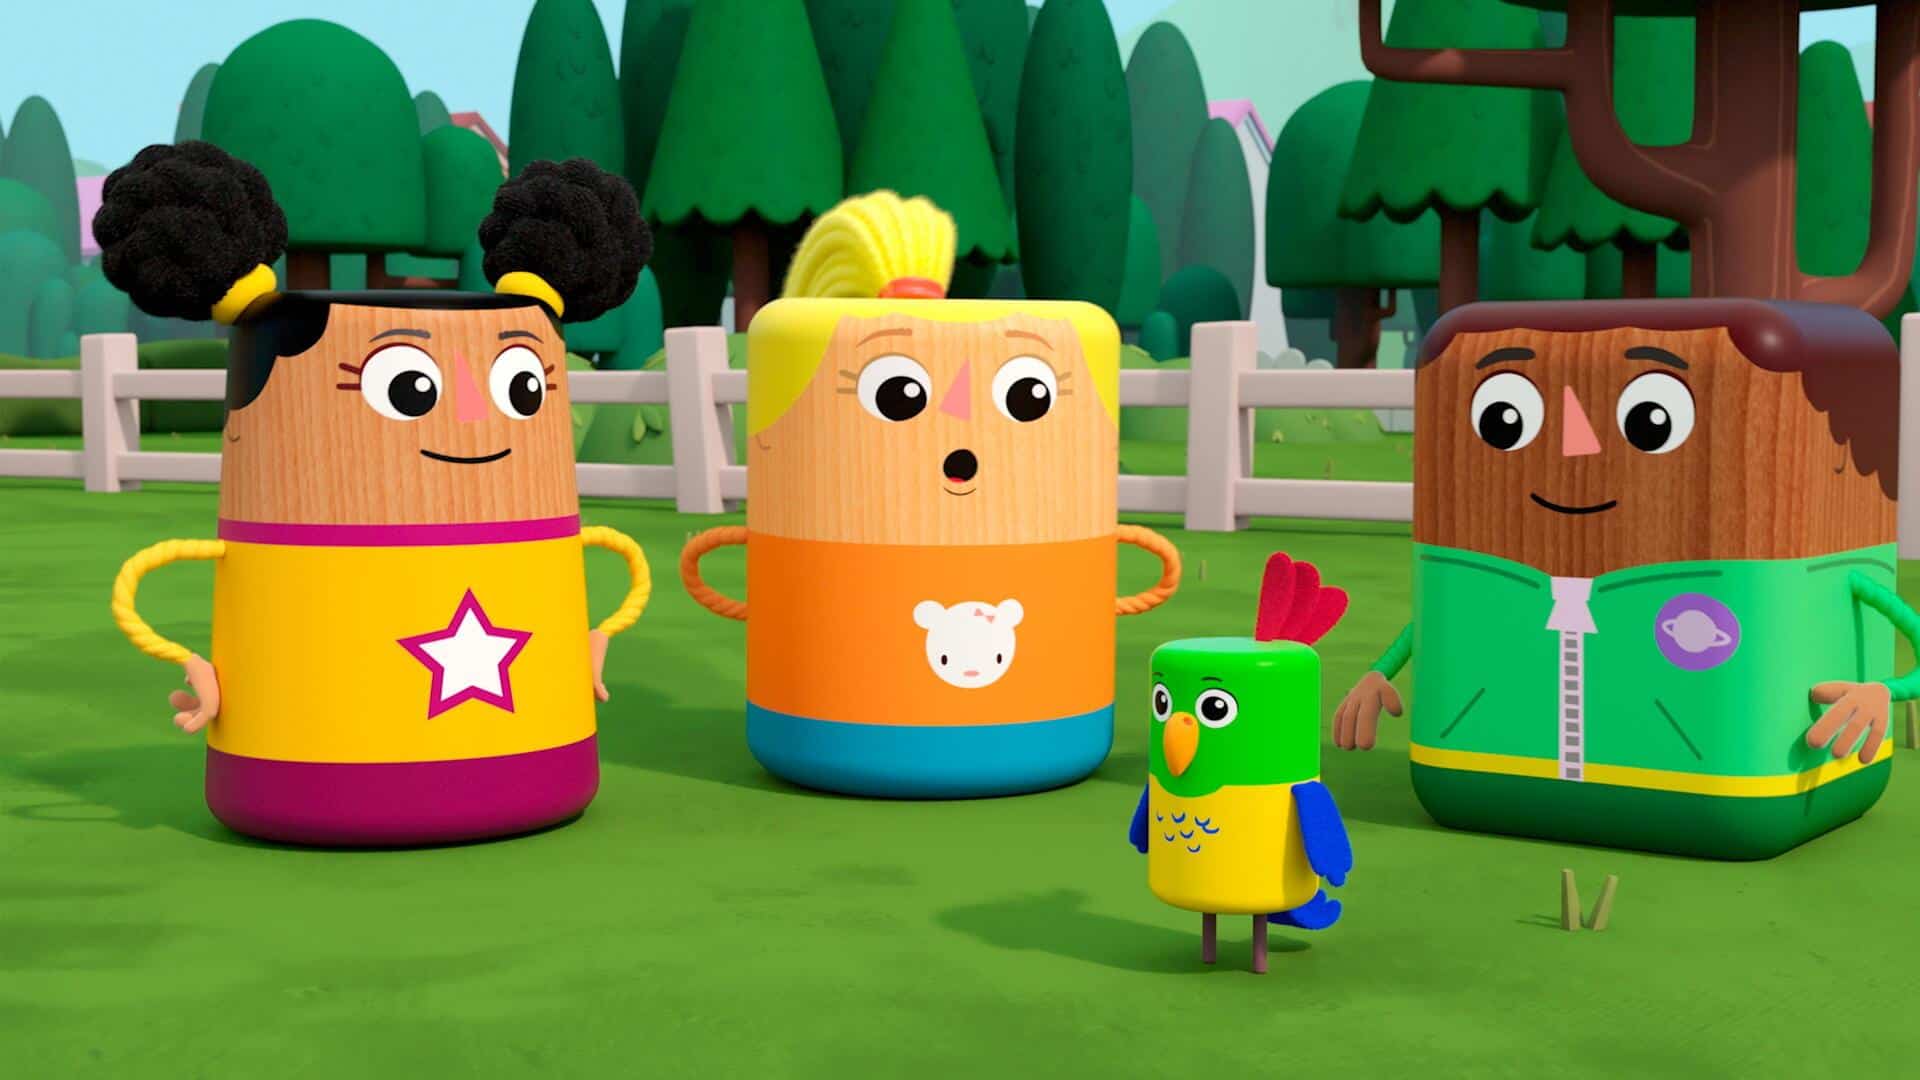 Animated block characters in front of a forest with a bird in this image from Sesame Workshop.